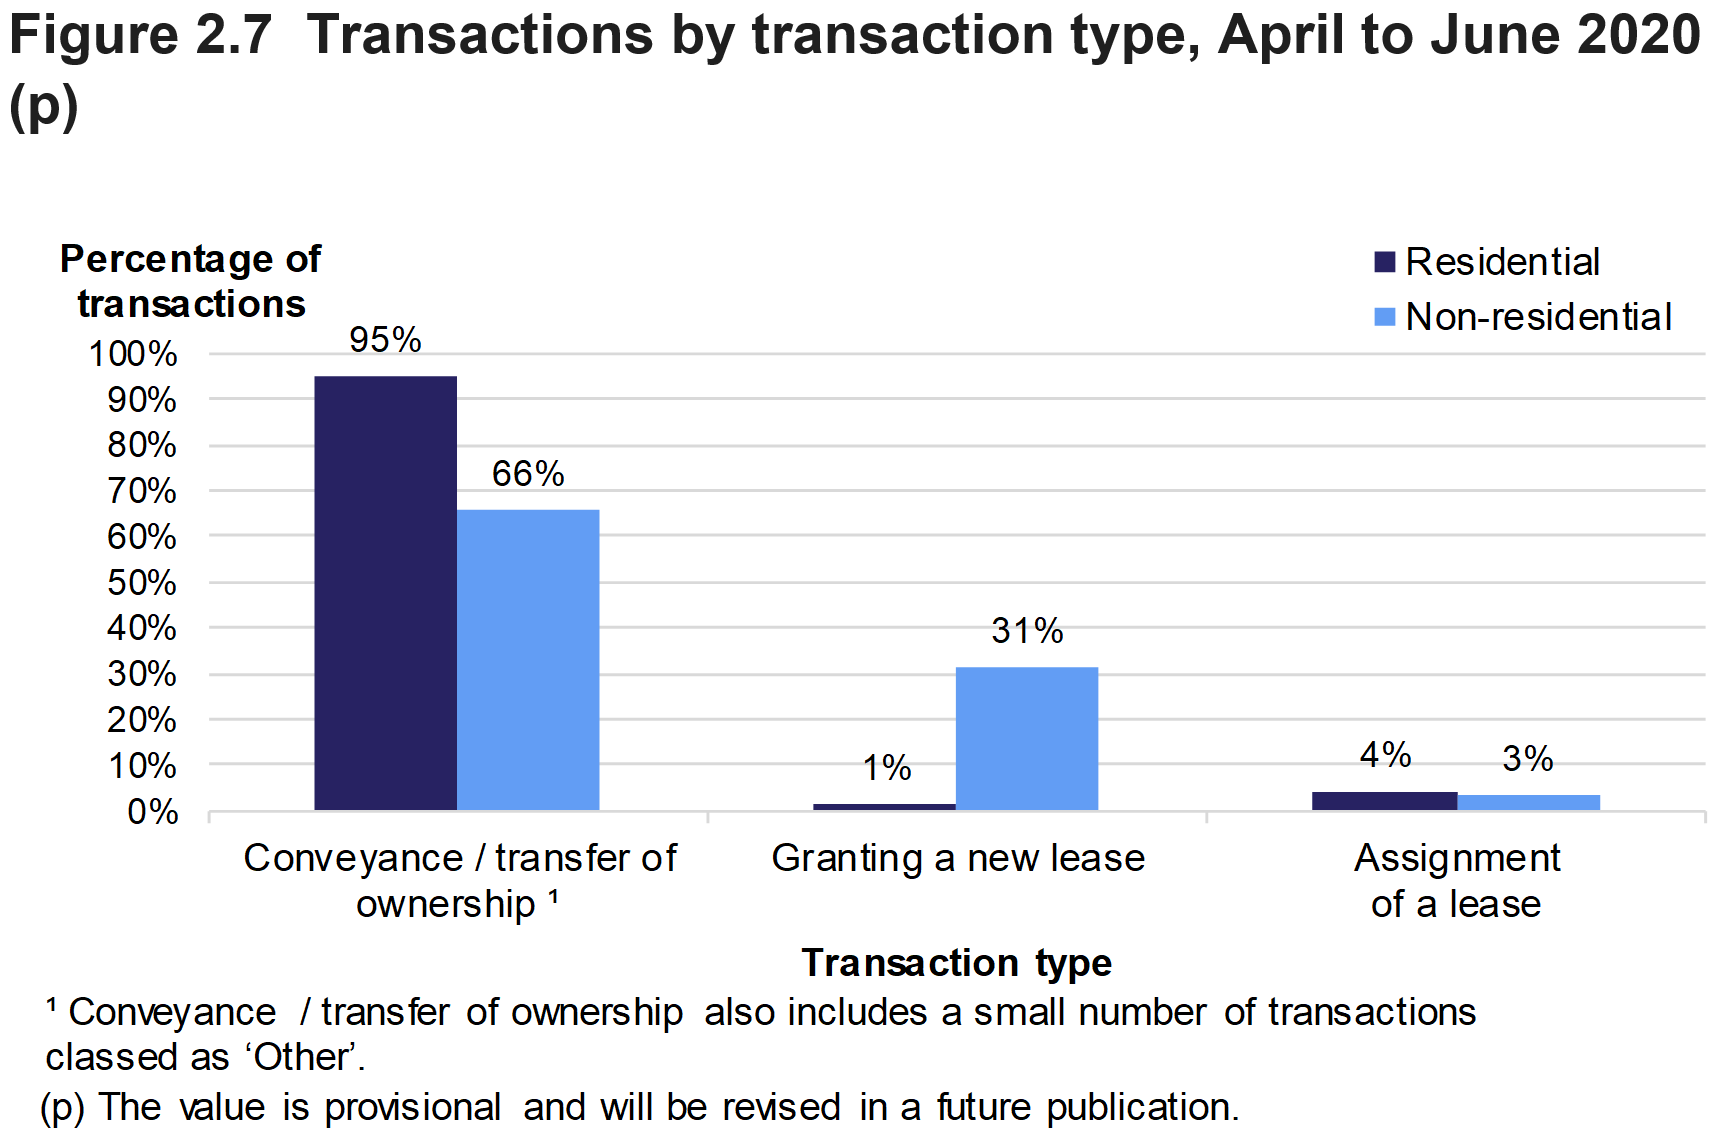 Figure 2.7 shows the percentage of transactions involving conveyance / transfer of ownership, granting of a new lease or assignment of a lease, for April to June 2020. Separate percentages are given for residential and non-residential transactions.